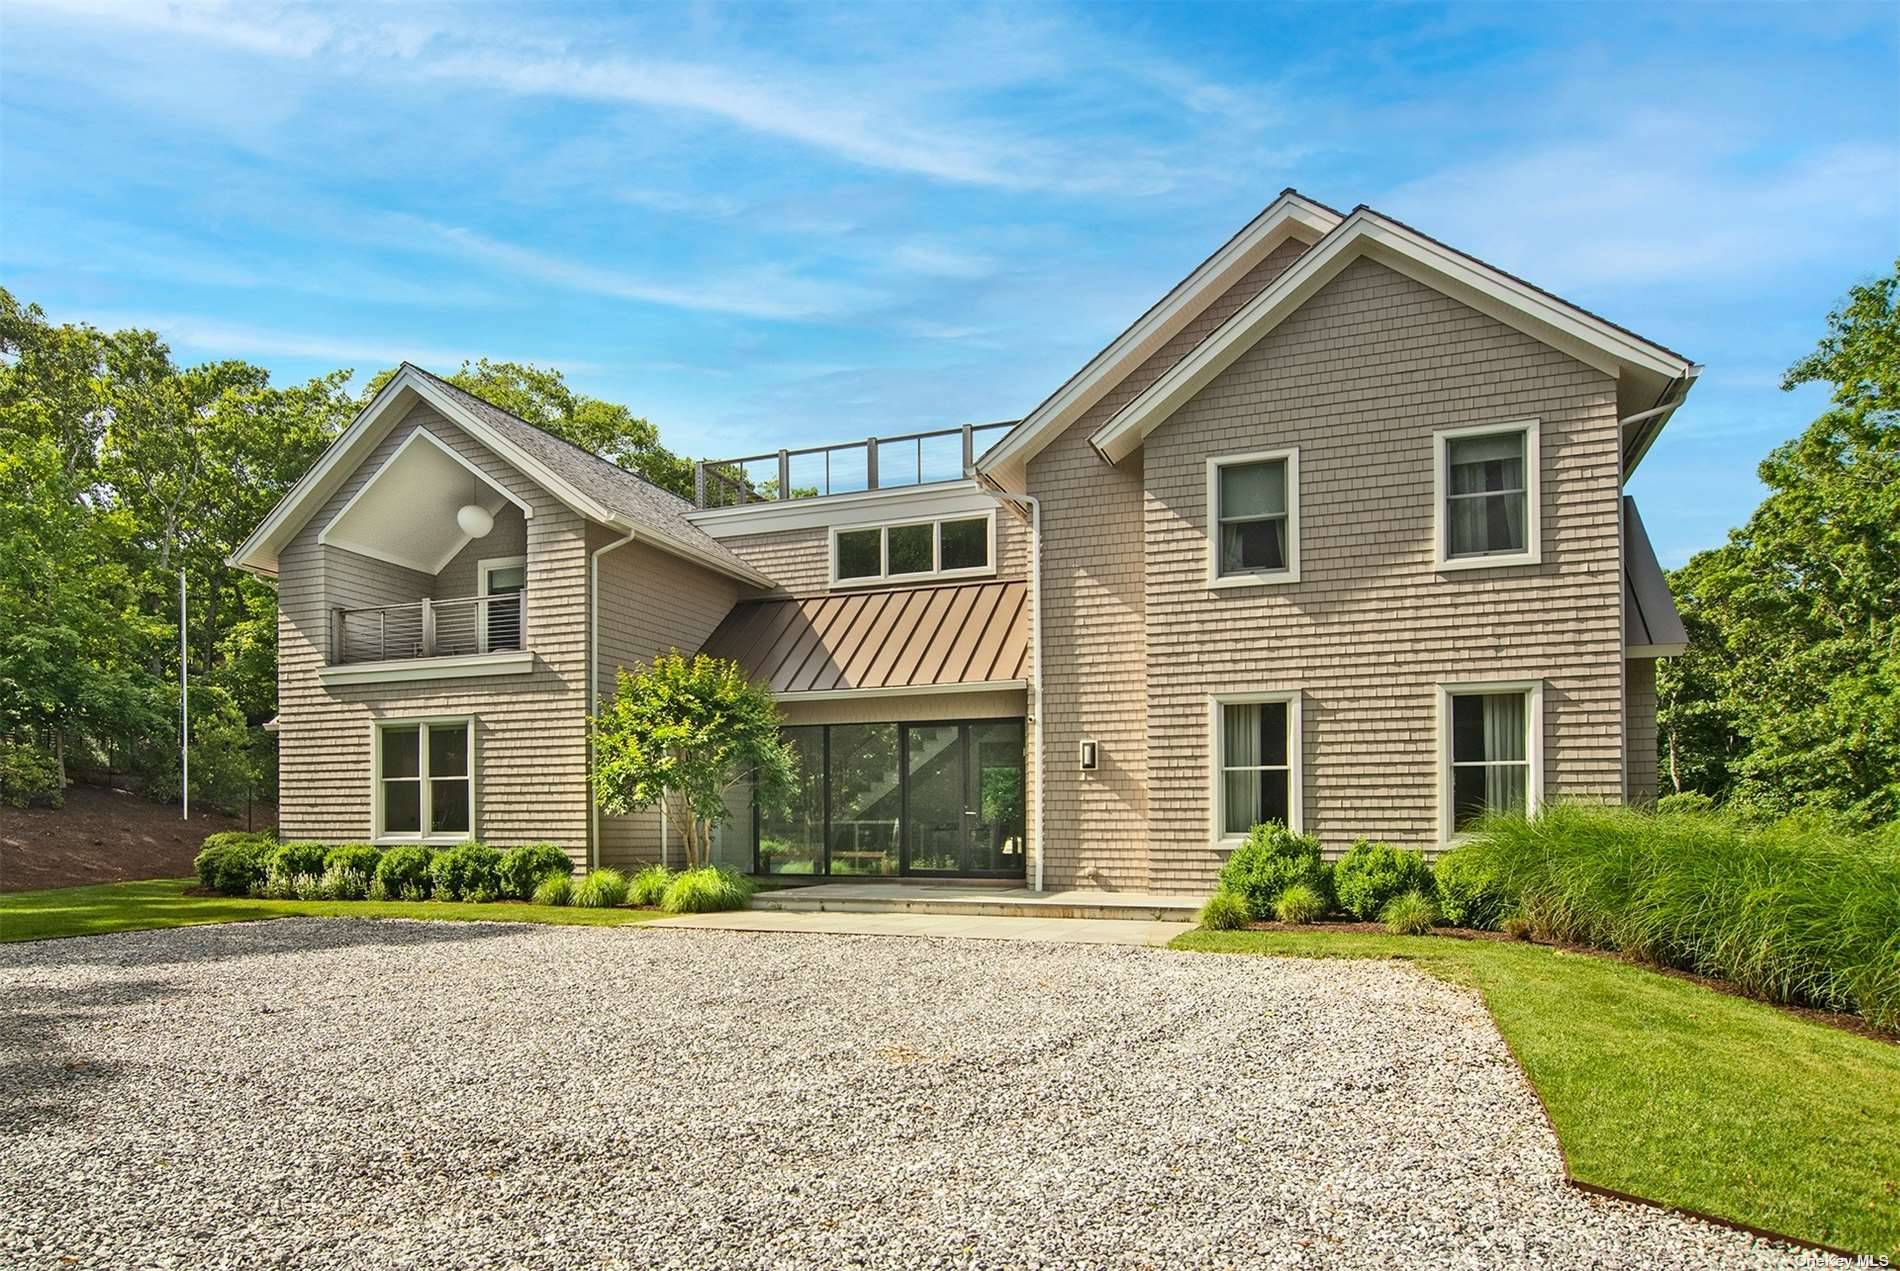 This beautiful residence is so close to the Ocean, village, and farm stands of Amagansett.